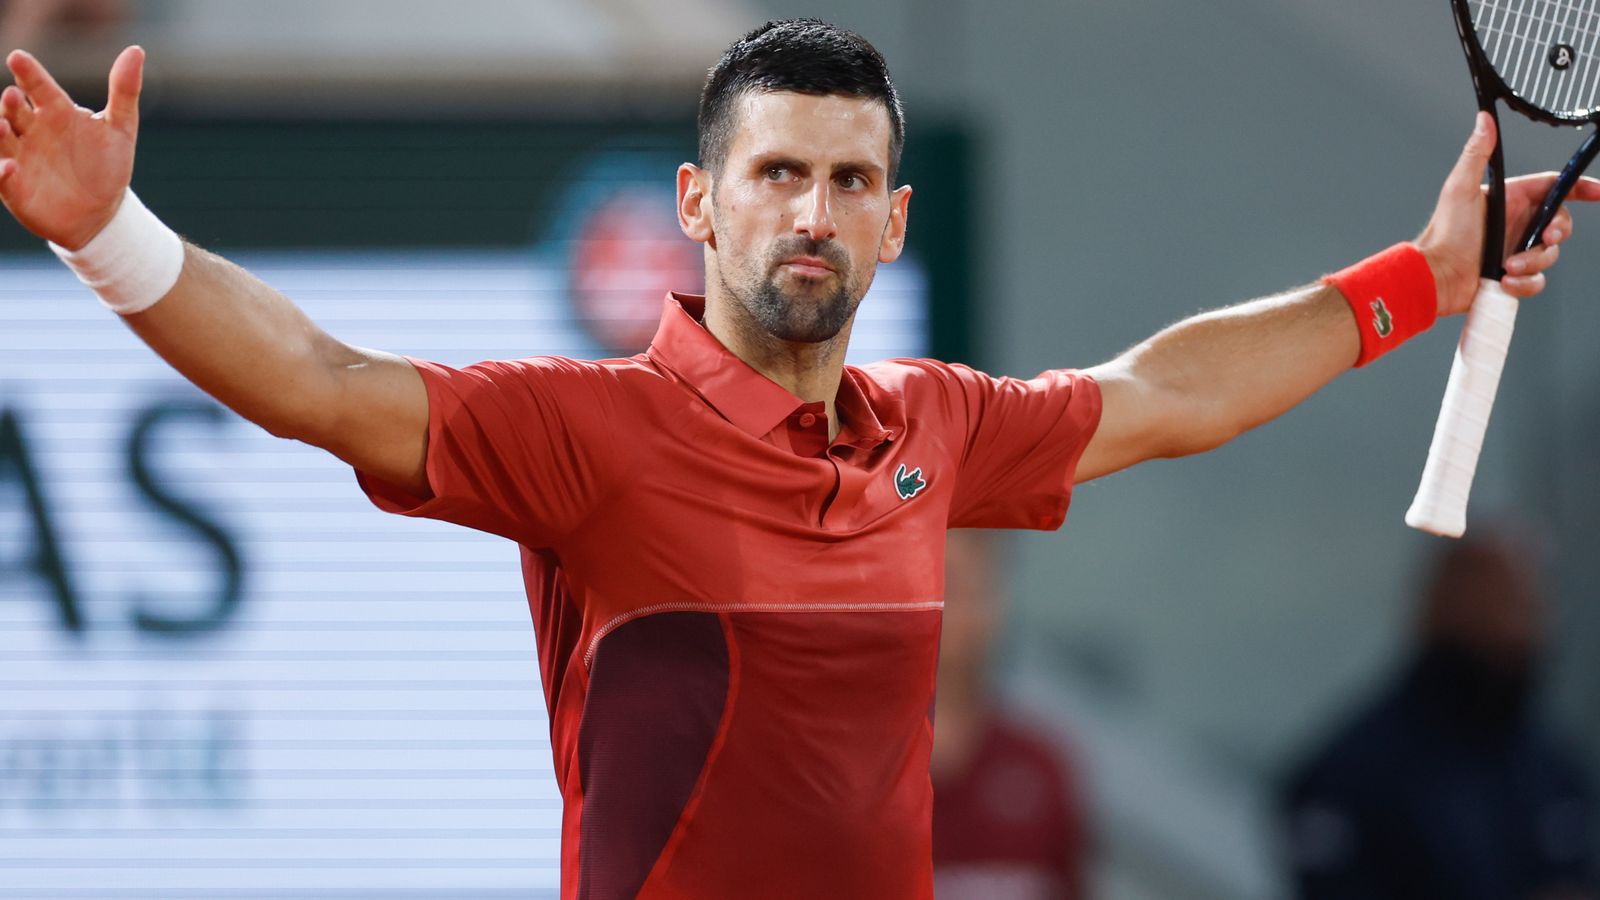 Novak Djokovic: Defending champ and top-ranked player survives epic French Open battle against LorenzoMusetti